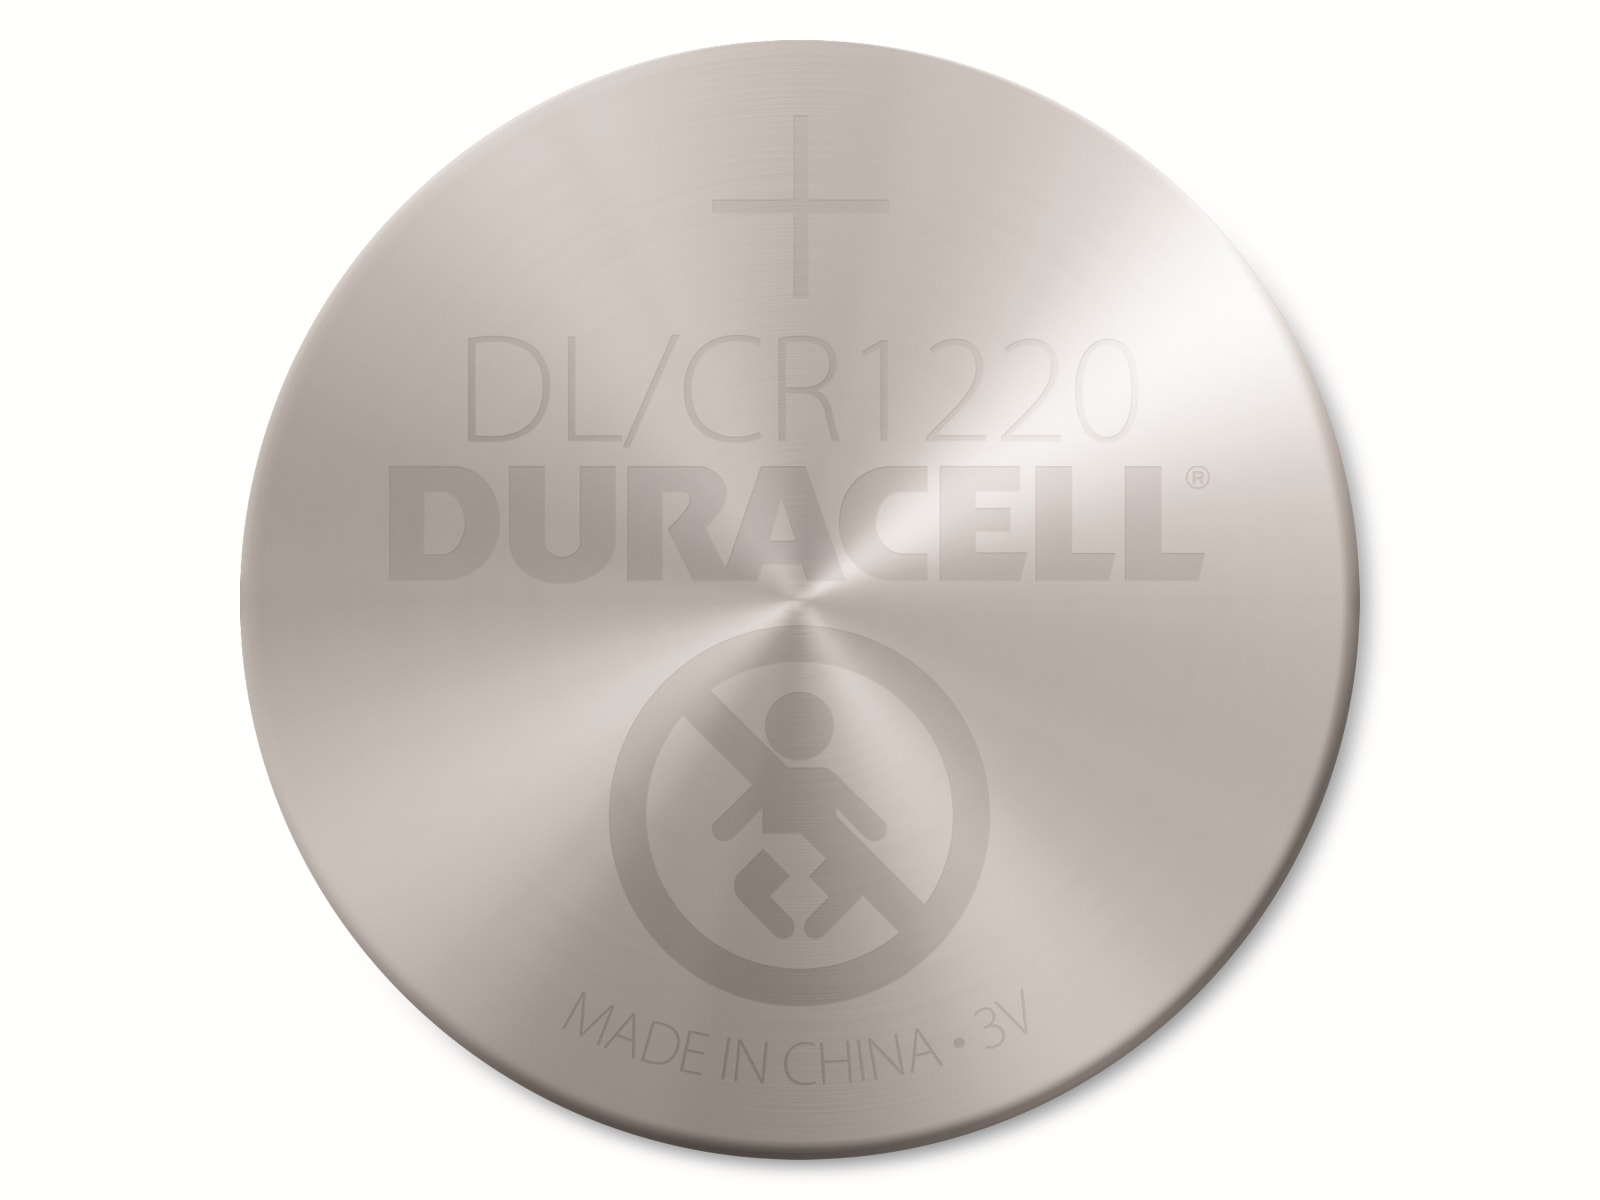 DURACELL Lithium-Knopfzelle CR1220, 3V, Electronics